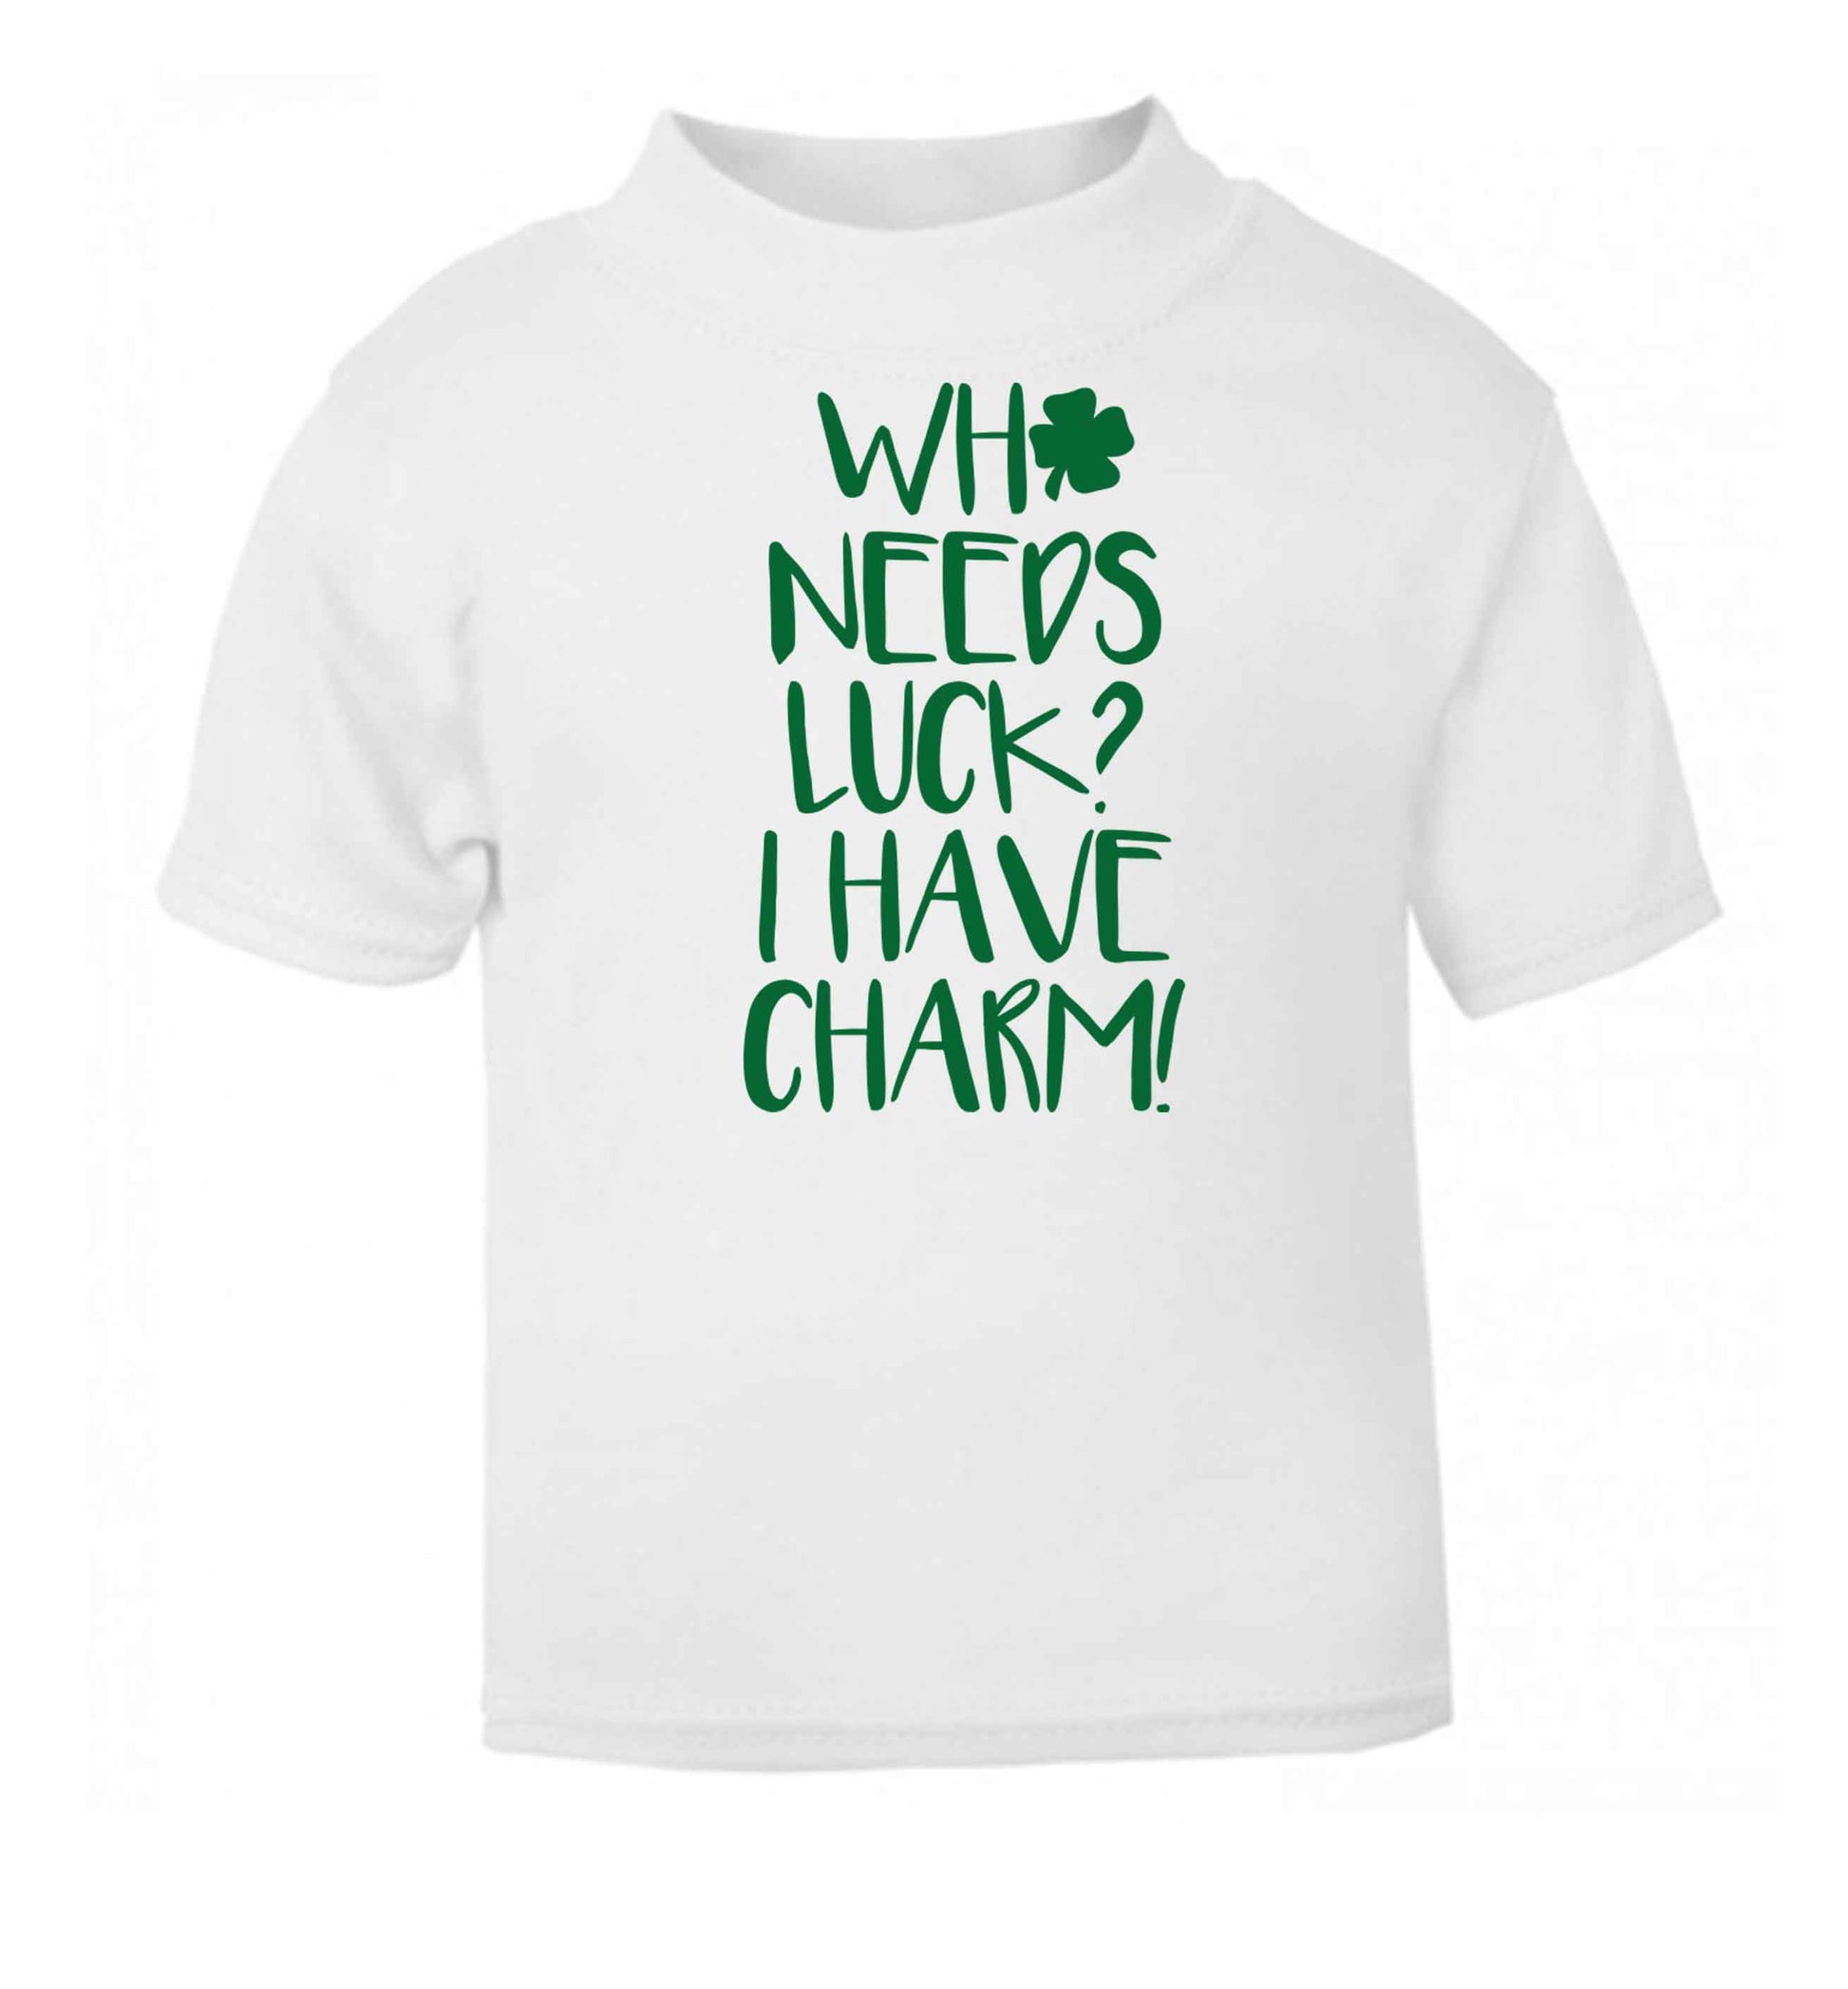 Who needs luck? I have charm! white baby toddler Tshirt 2 Years